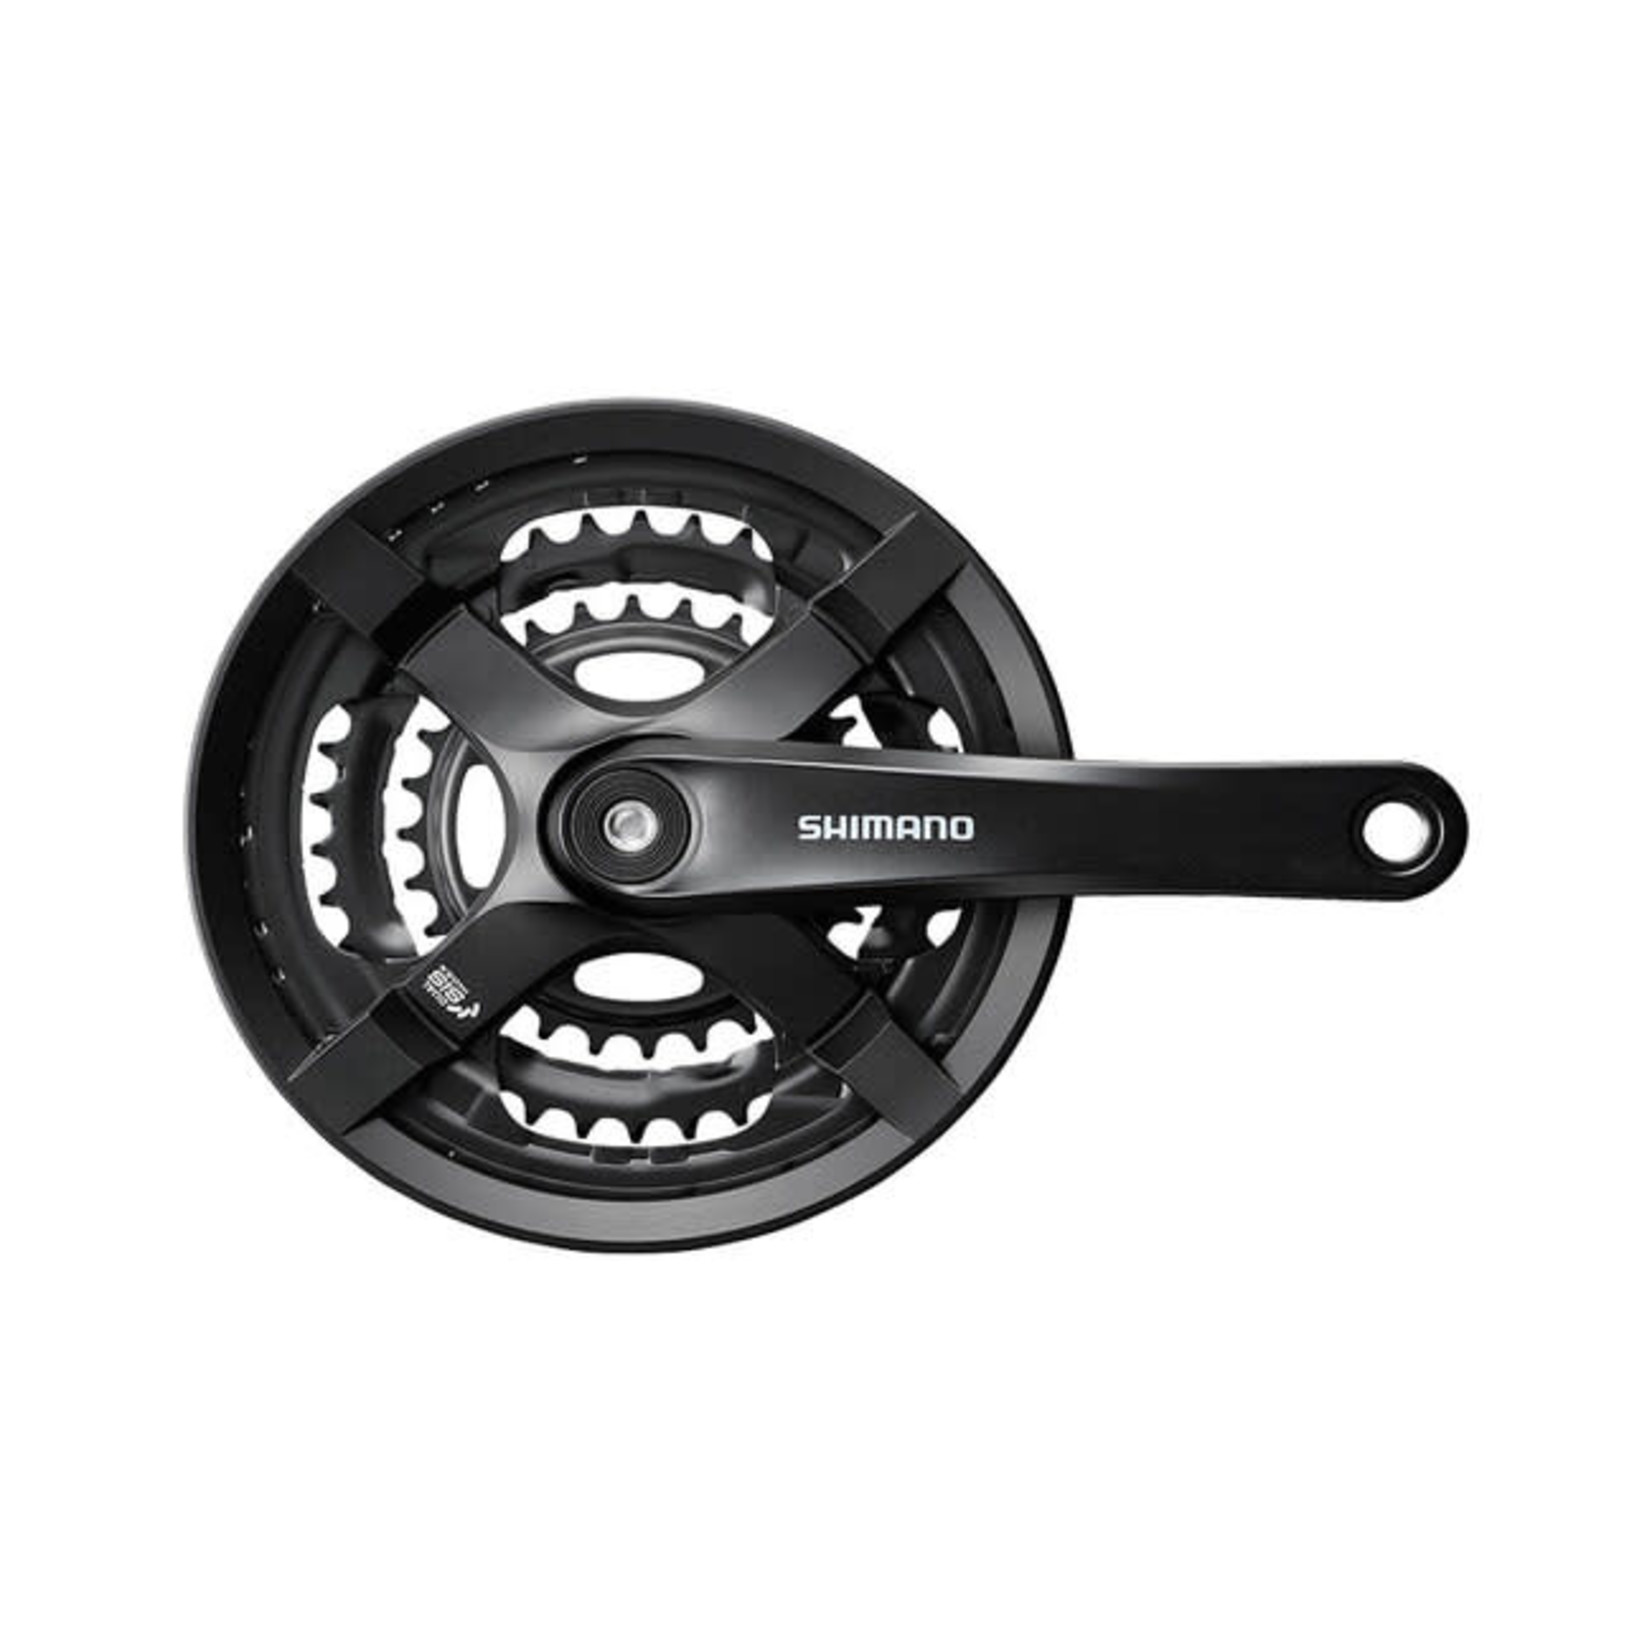 Shimano FRONT CHAINWHEEL, FC-TY501, FOR REAR 6/7/8-SPEED, 175MM, 48X38X28T W/CHAIN GUARD, W/CRANK FIXING BOLT, BLACK